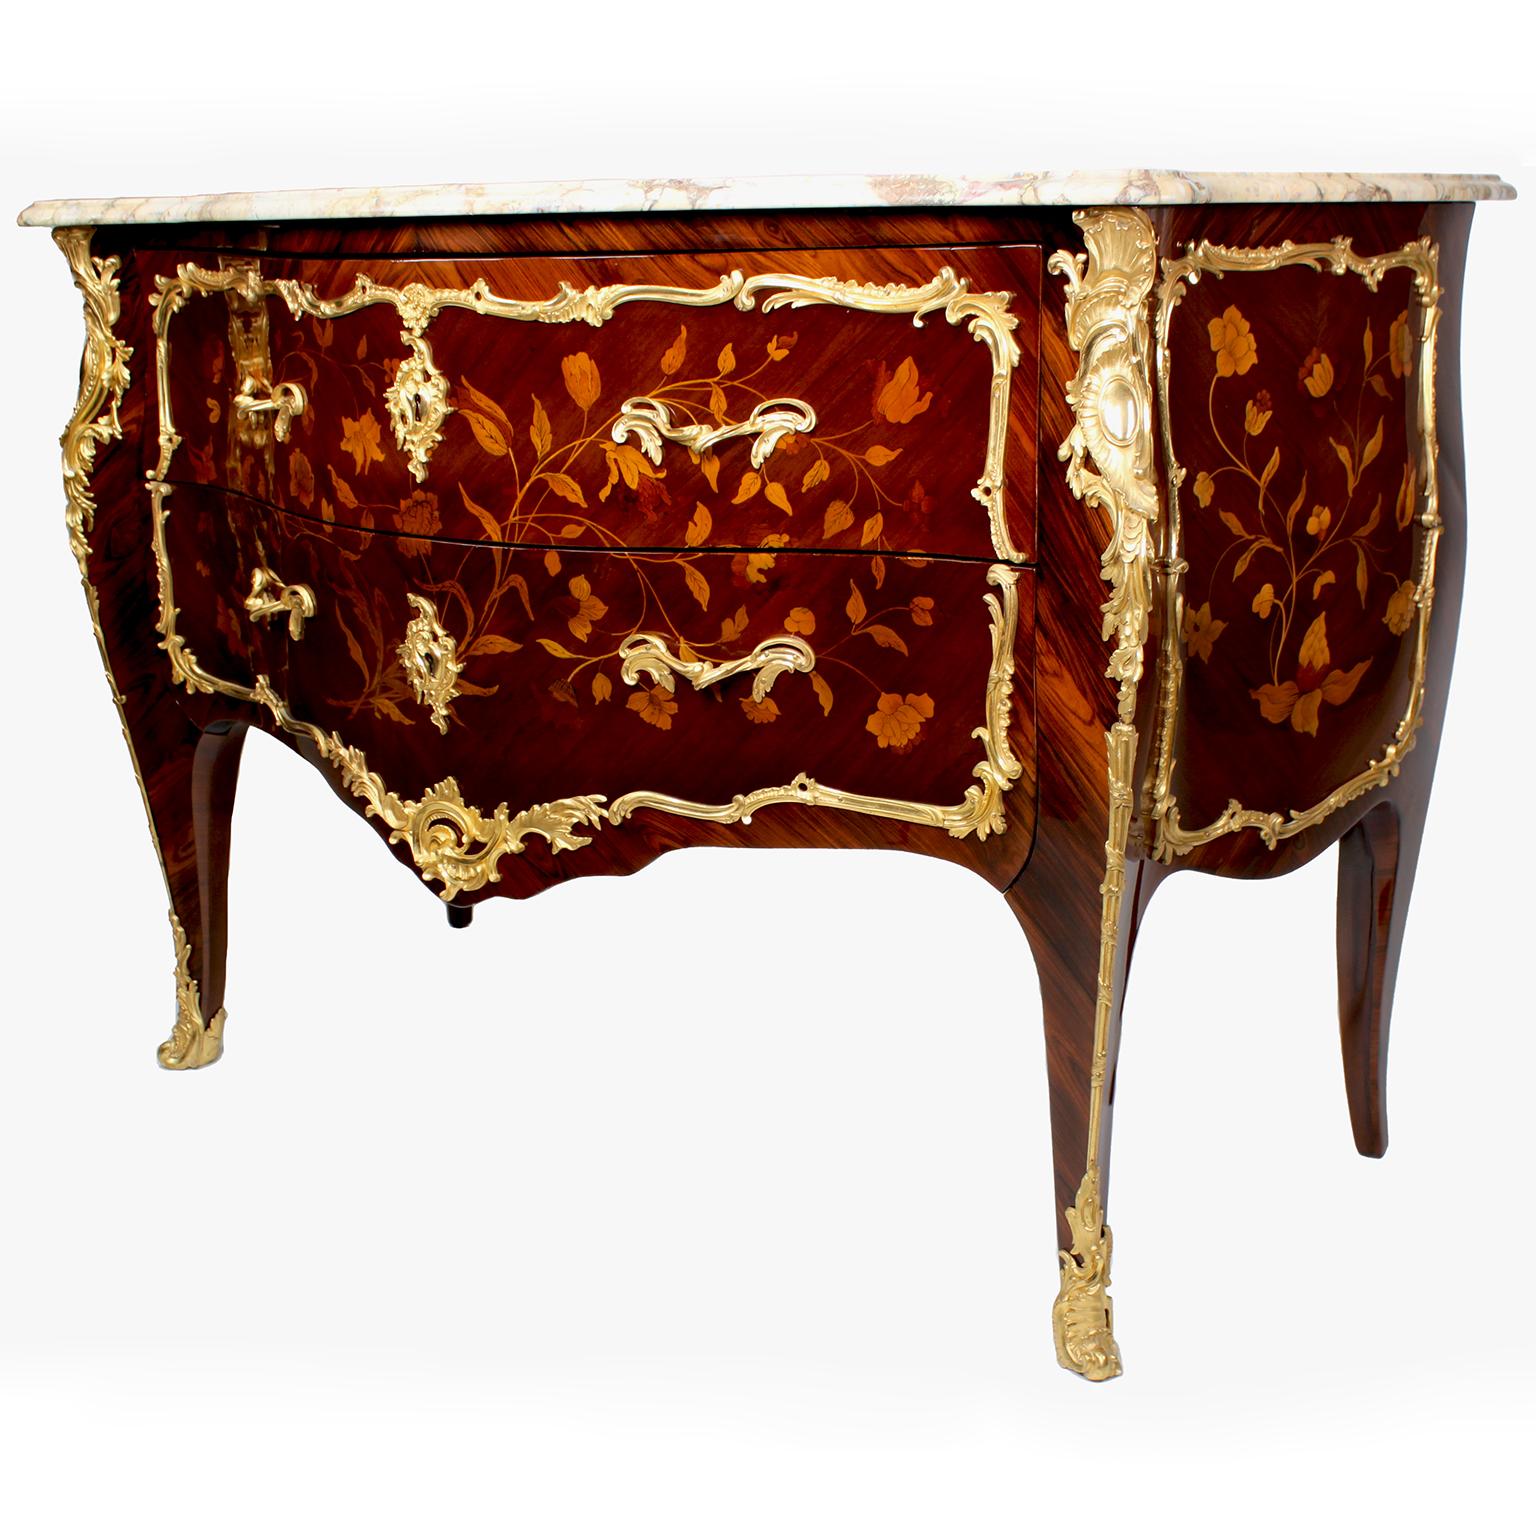 A very fine pair of French 19th century Louis XV style gilt-bronze mounted floral marquetry Bombé commodes with marble top. The serpentine two-drawer commodes, with rosewood, king-wood and fruit-wood floral inlaid, surmounted with finely chased